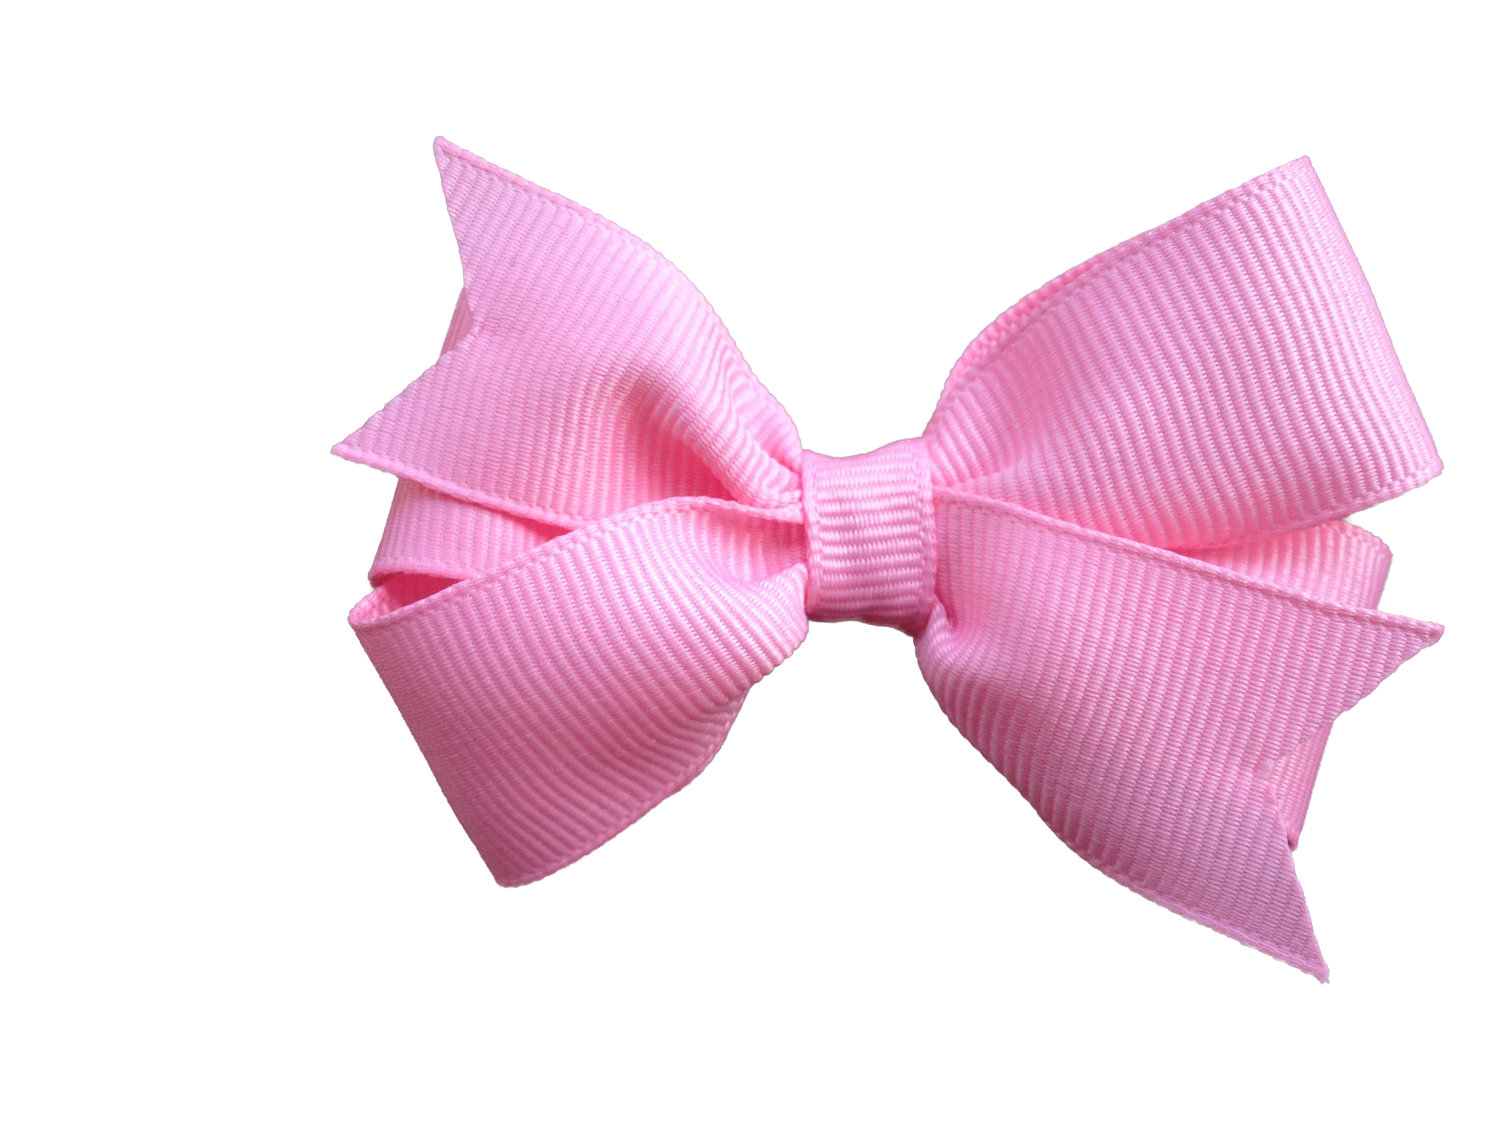 3 inch pink hair bow pink bow baby bow by BrownEyedBowtique